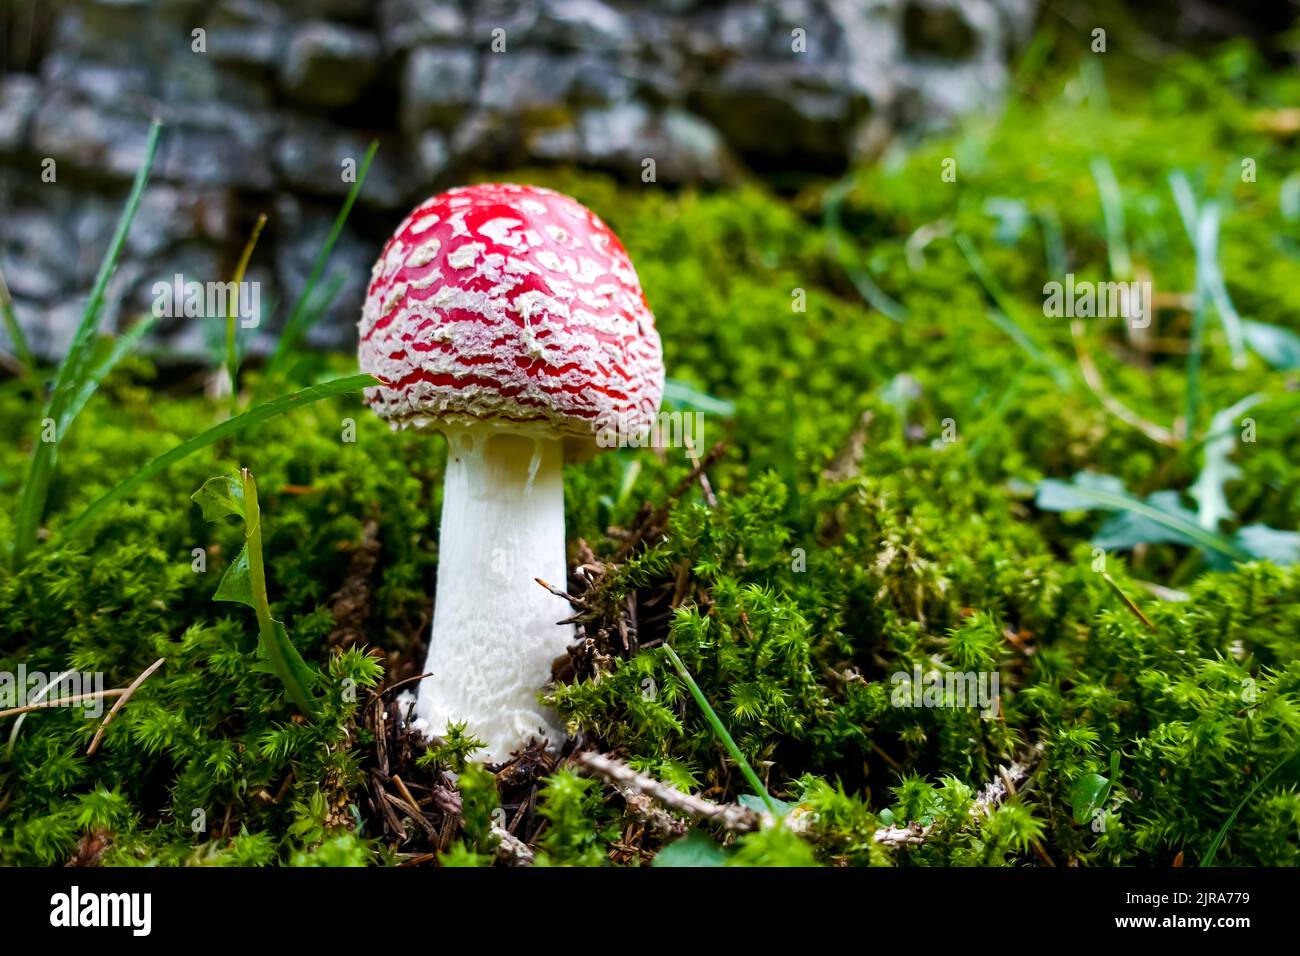 Red and white toxic, poisonous and dangerous amanita muscaria fly agaric mushroom on the ground of a green autumn forest amidst moss in a green forest Stock Photo